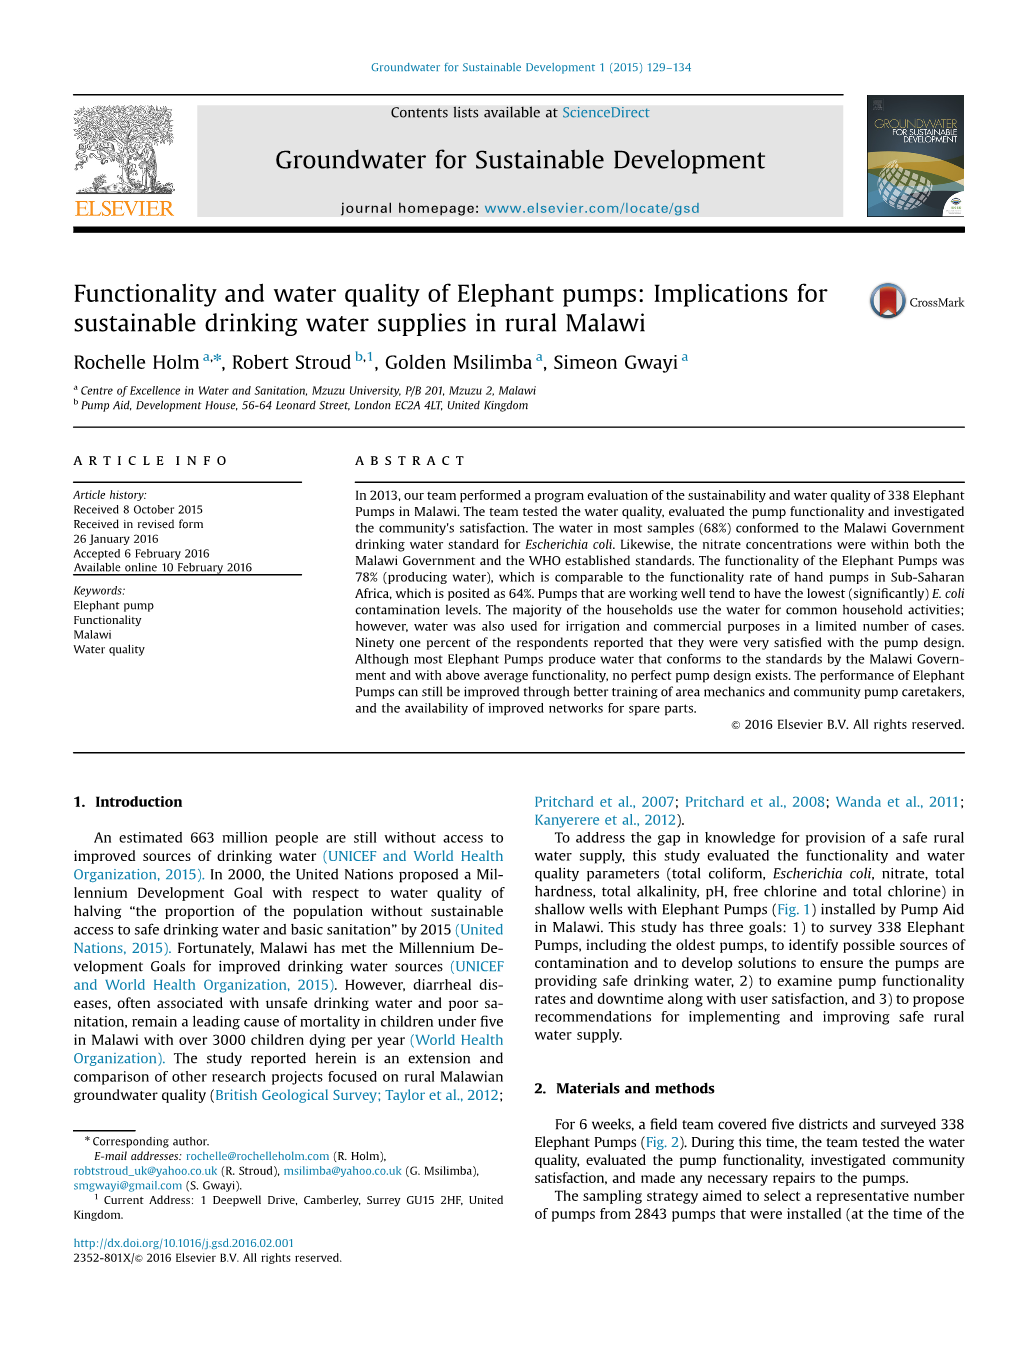 Functionality and Water Quality of Elephant Pumps: Implications for Sustainable Drinking Water Supplies in Rural Malawi